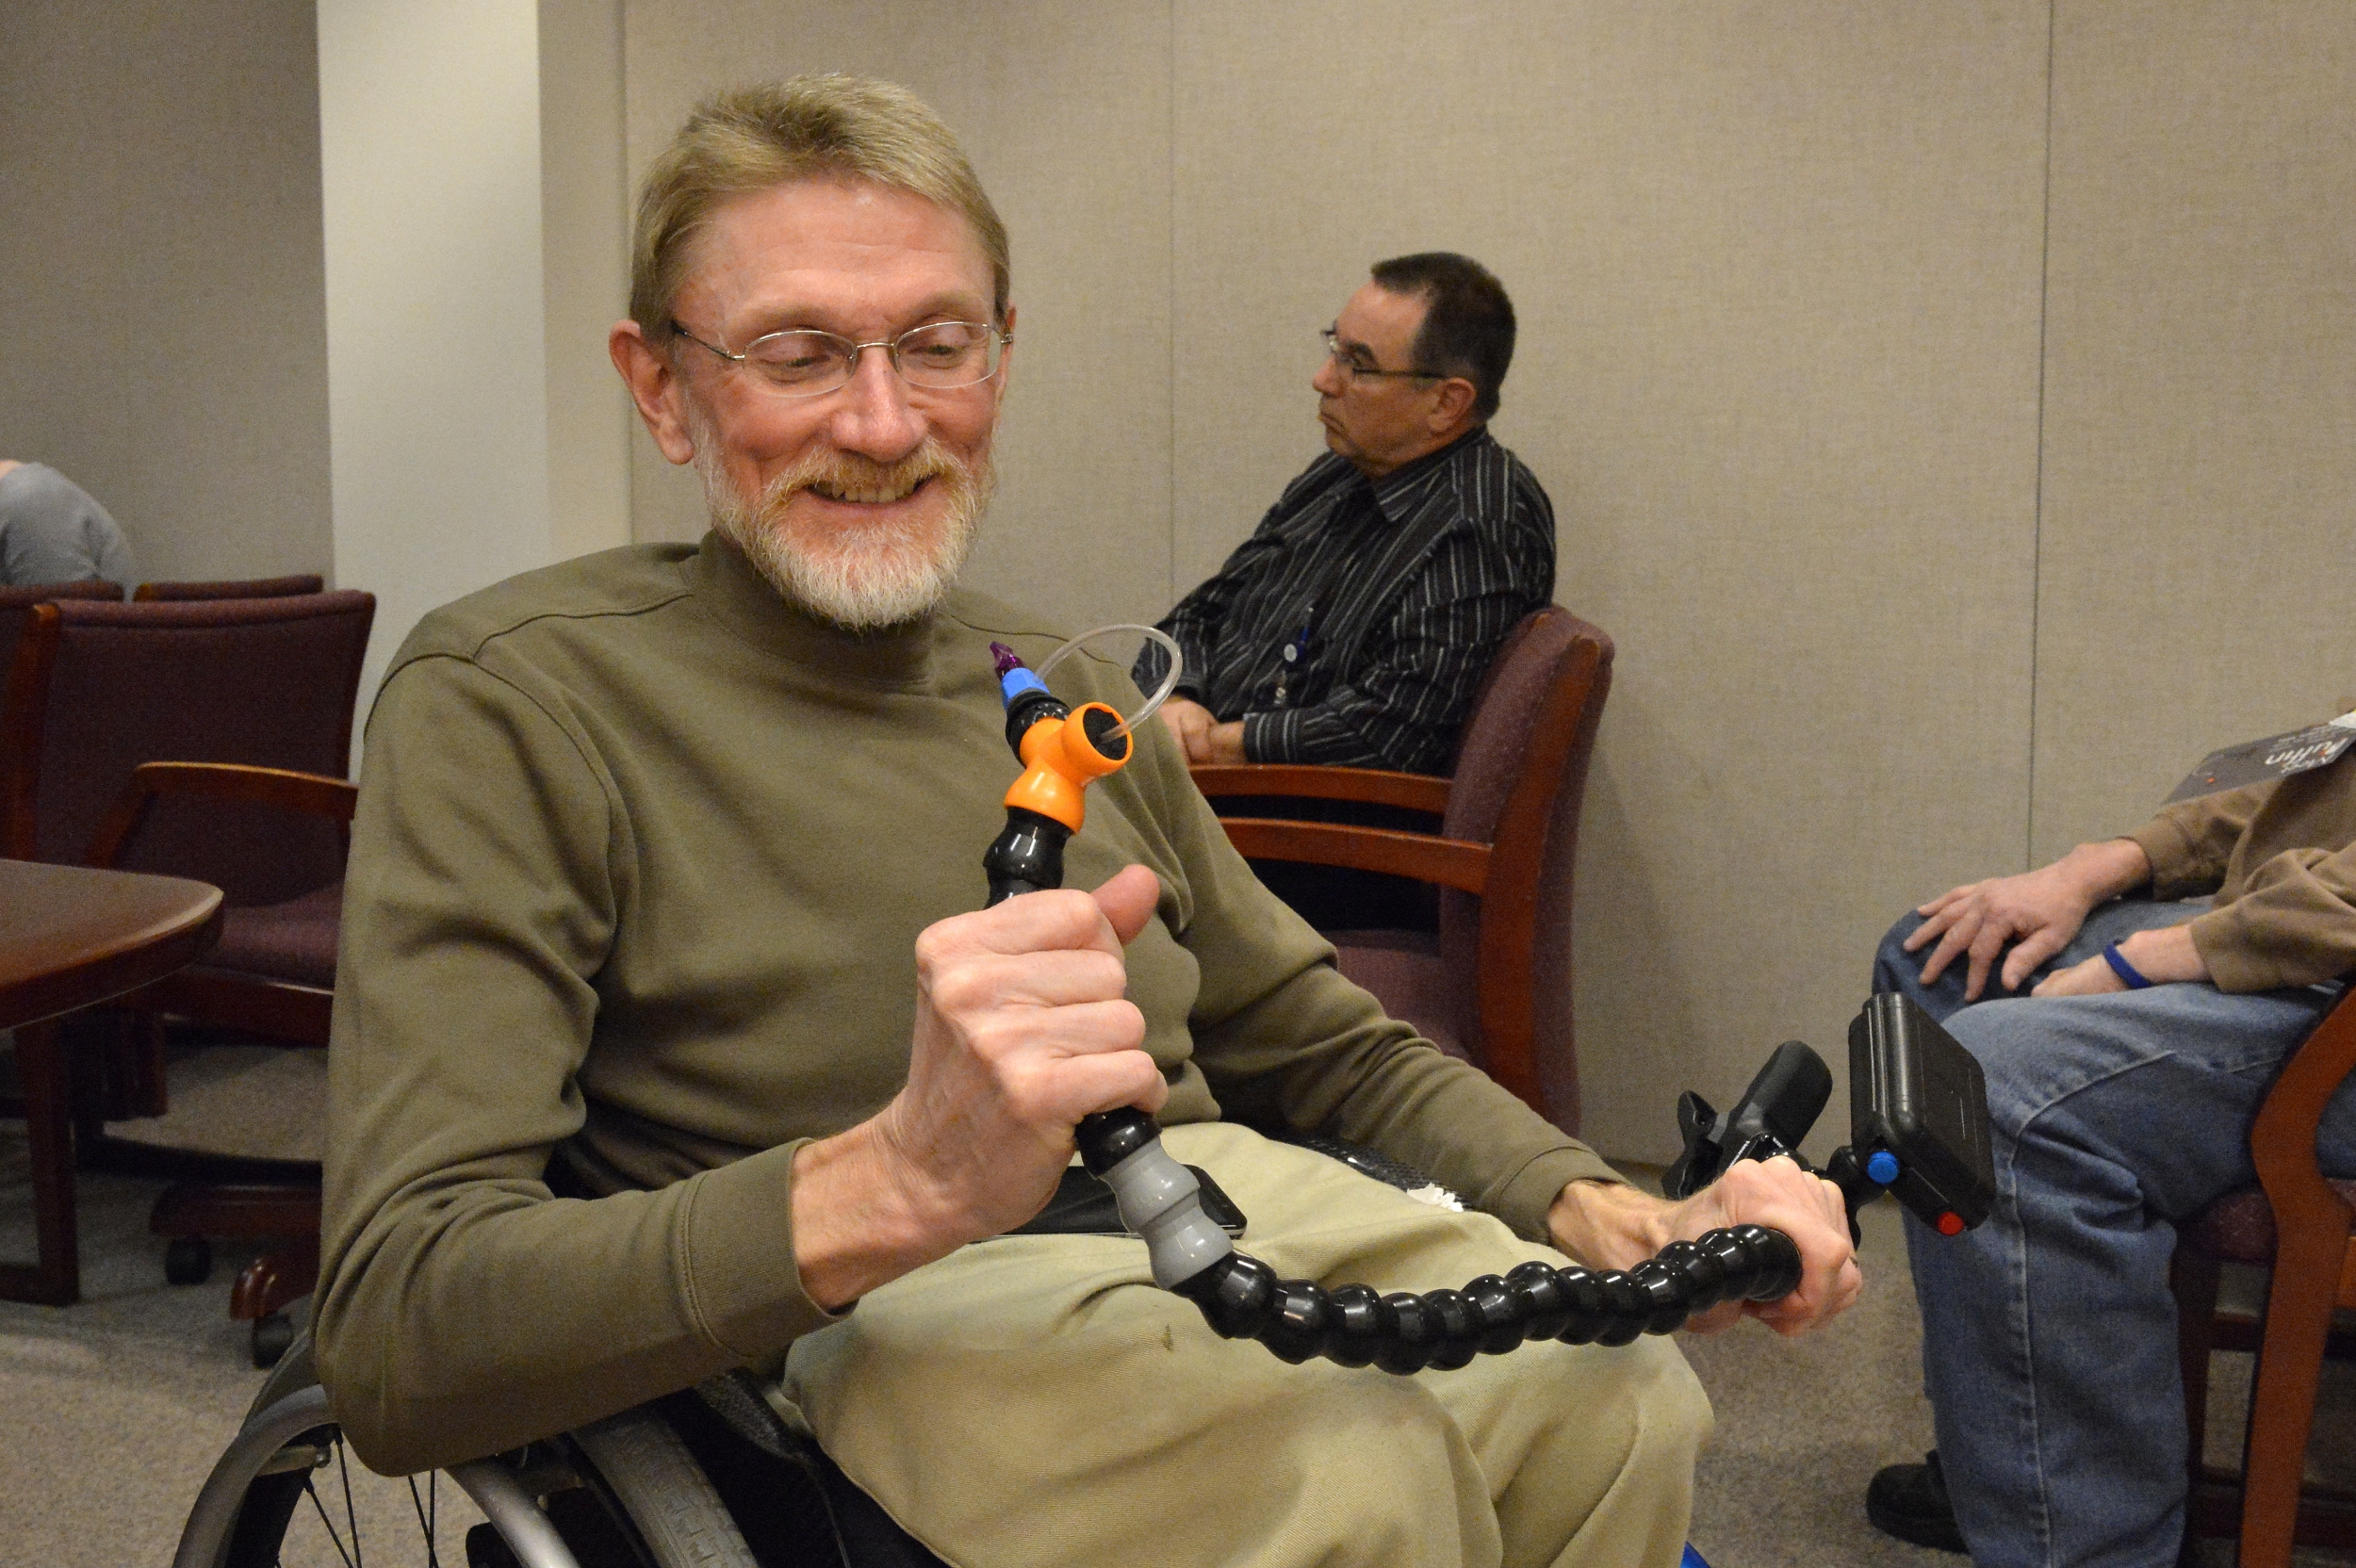 A LED committee member, Gary Brendel, helped organize a seminar for employees to learn more about the Puffin, a wireless sip-and-puff joystick controller designed by MIT students for a client with cerebral palsy.